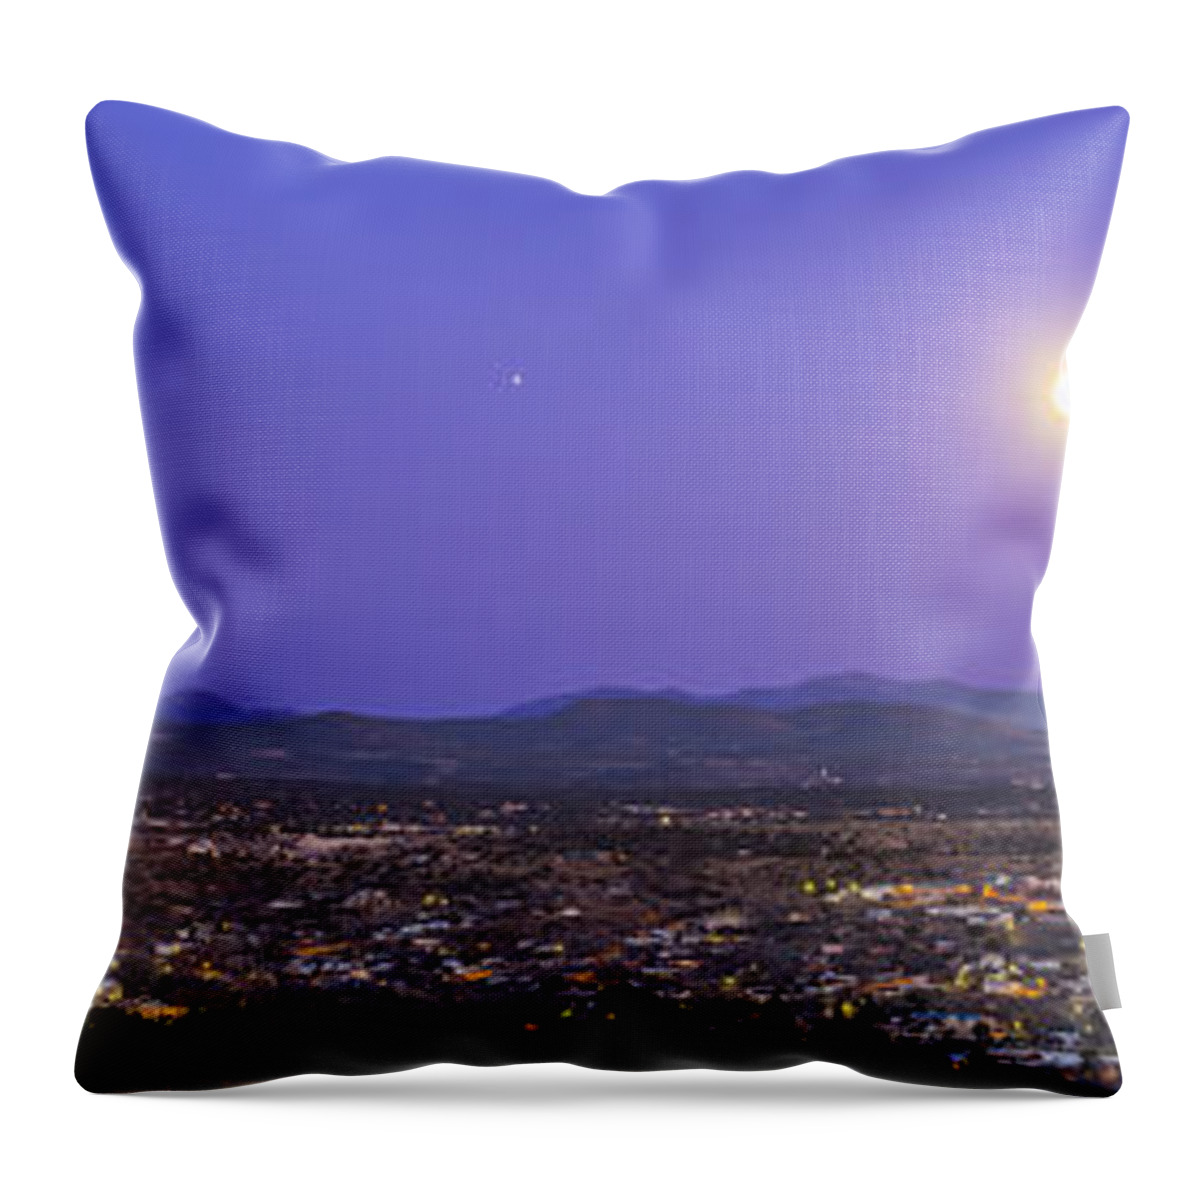 Full Moon Throw Pillow featuring the photograph Full Moon Rising Over Silver City, New by Alan Dyer